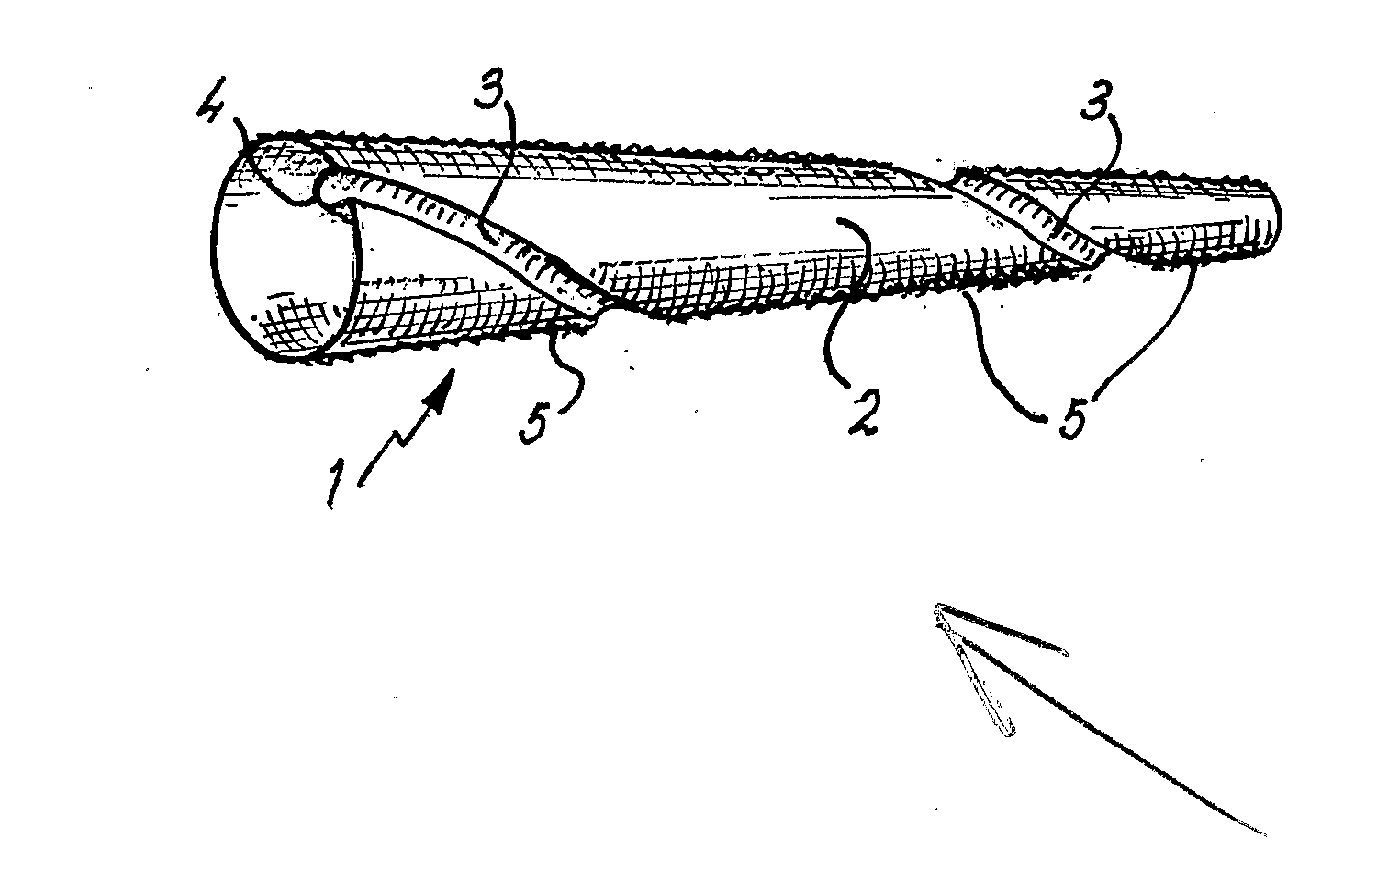 Helical Formation for a Conduit